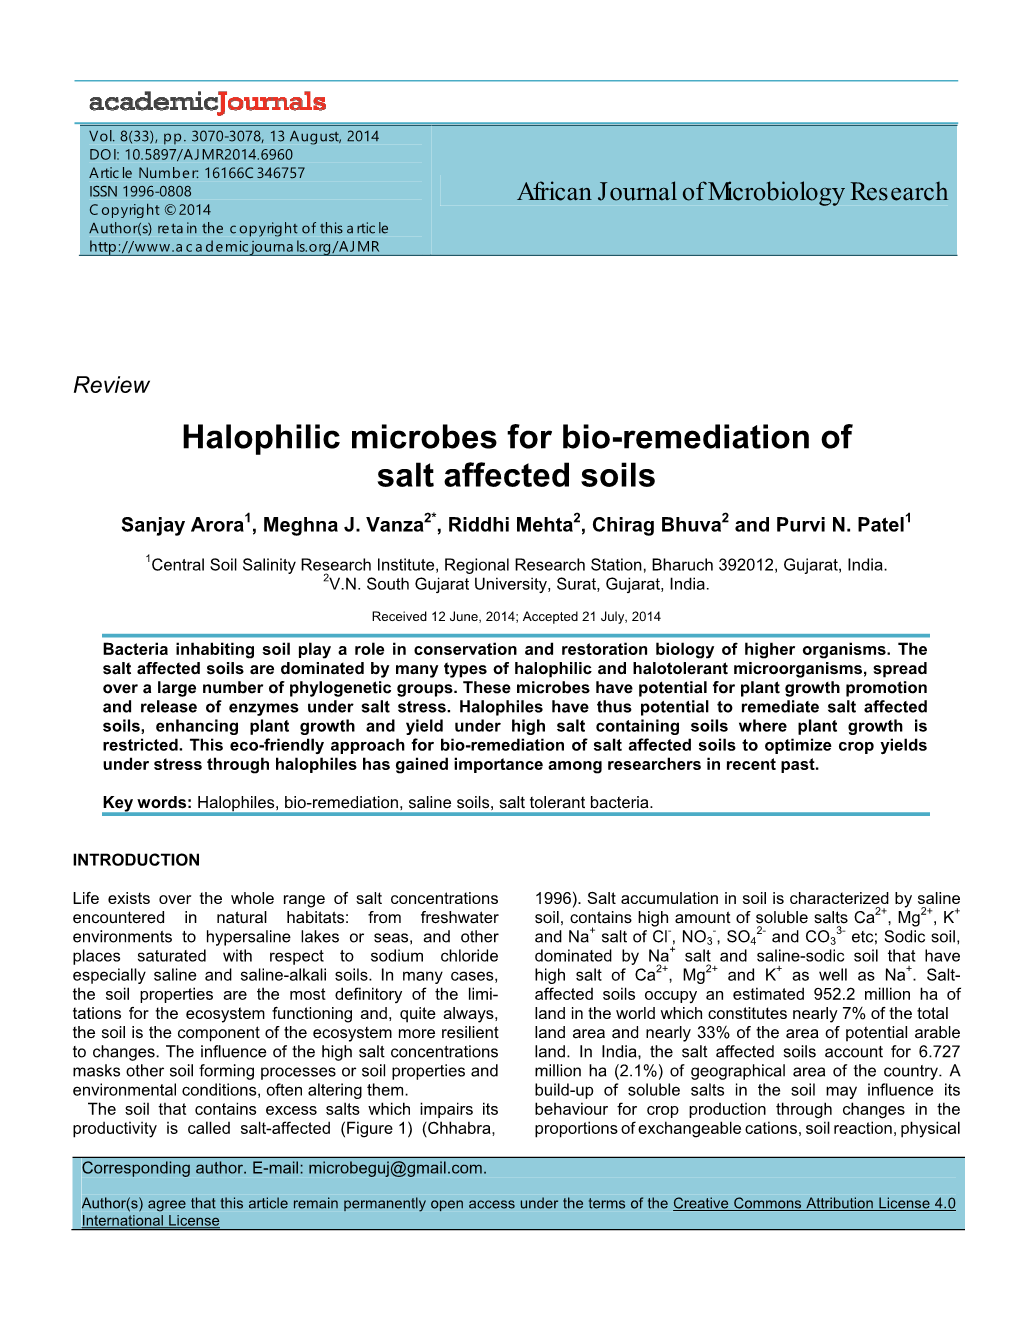 Halophilic Microbes for Bio-Remediation of Salt Affected Soils